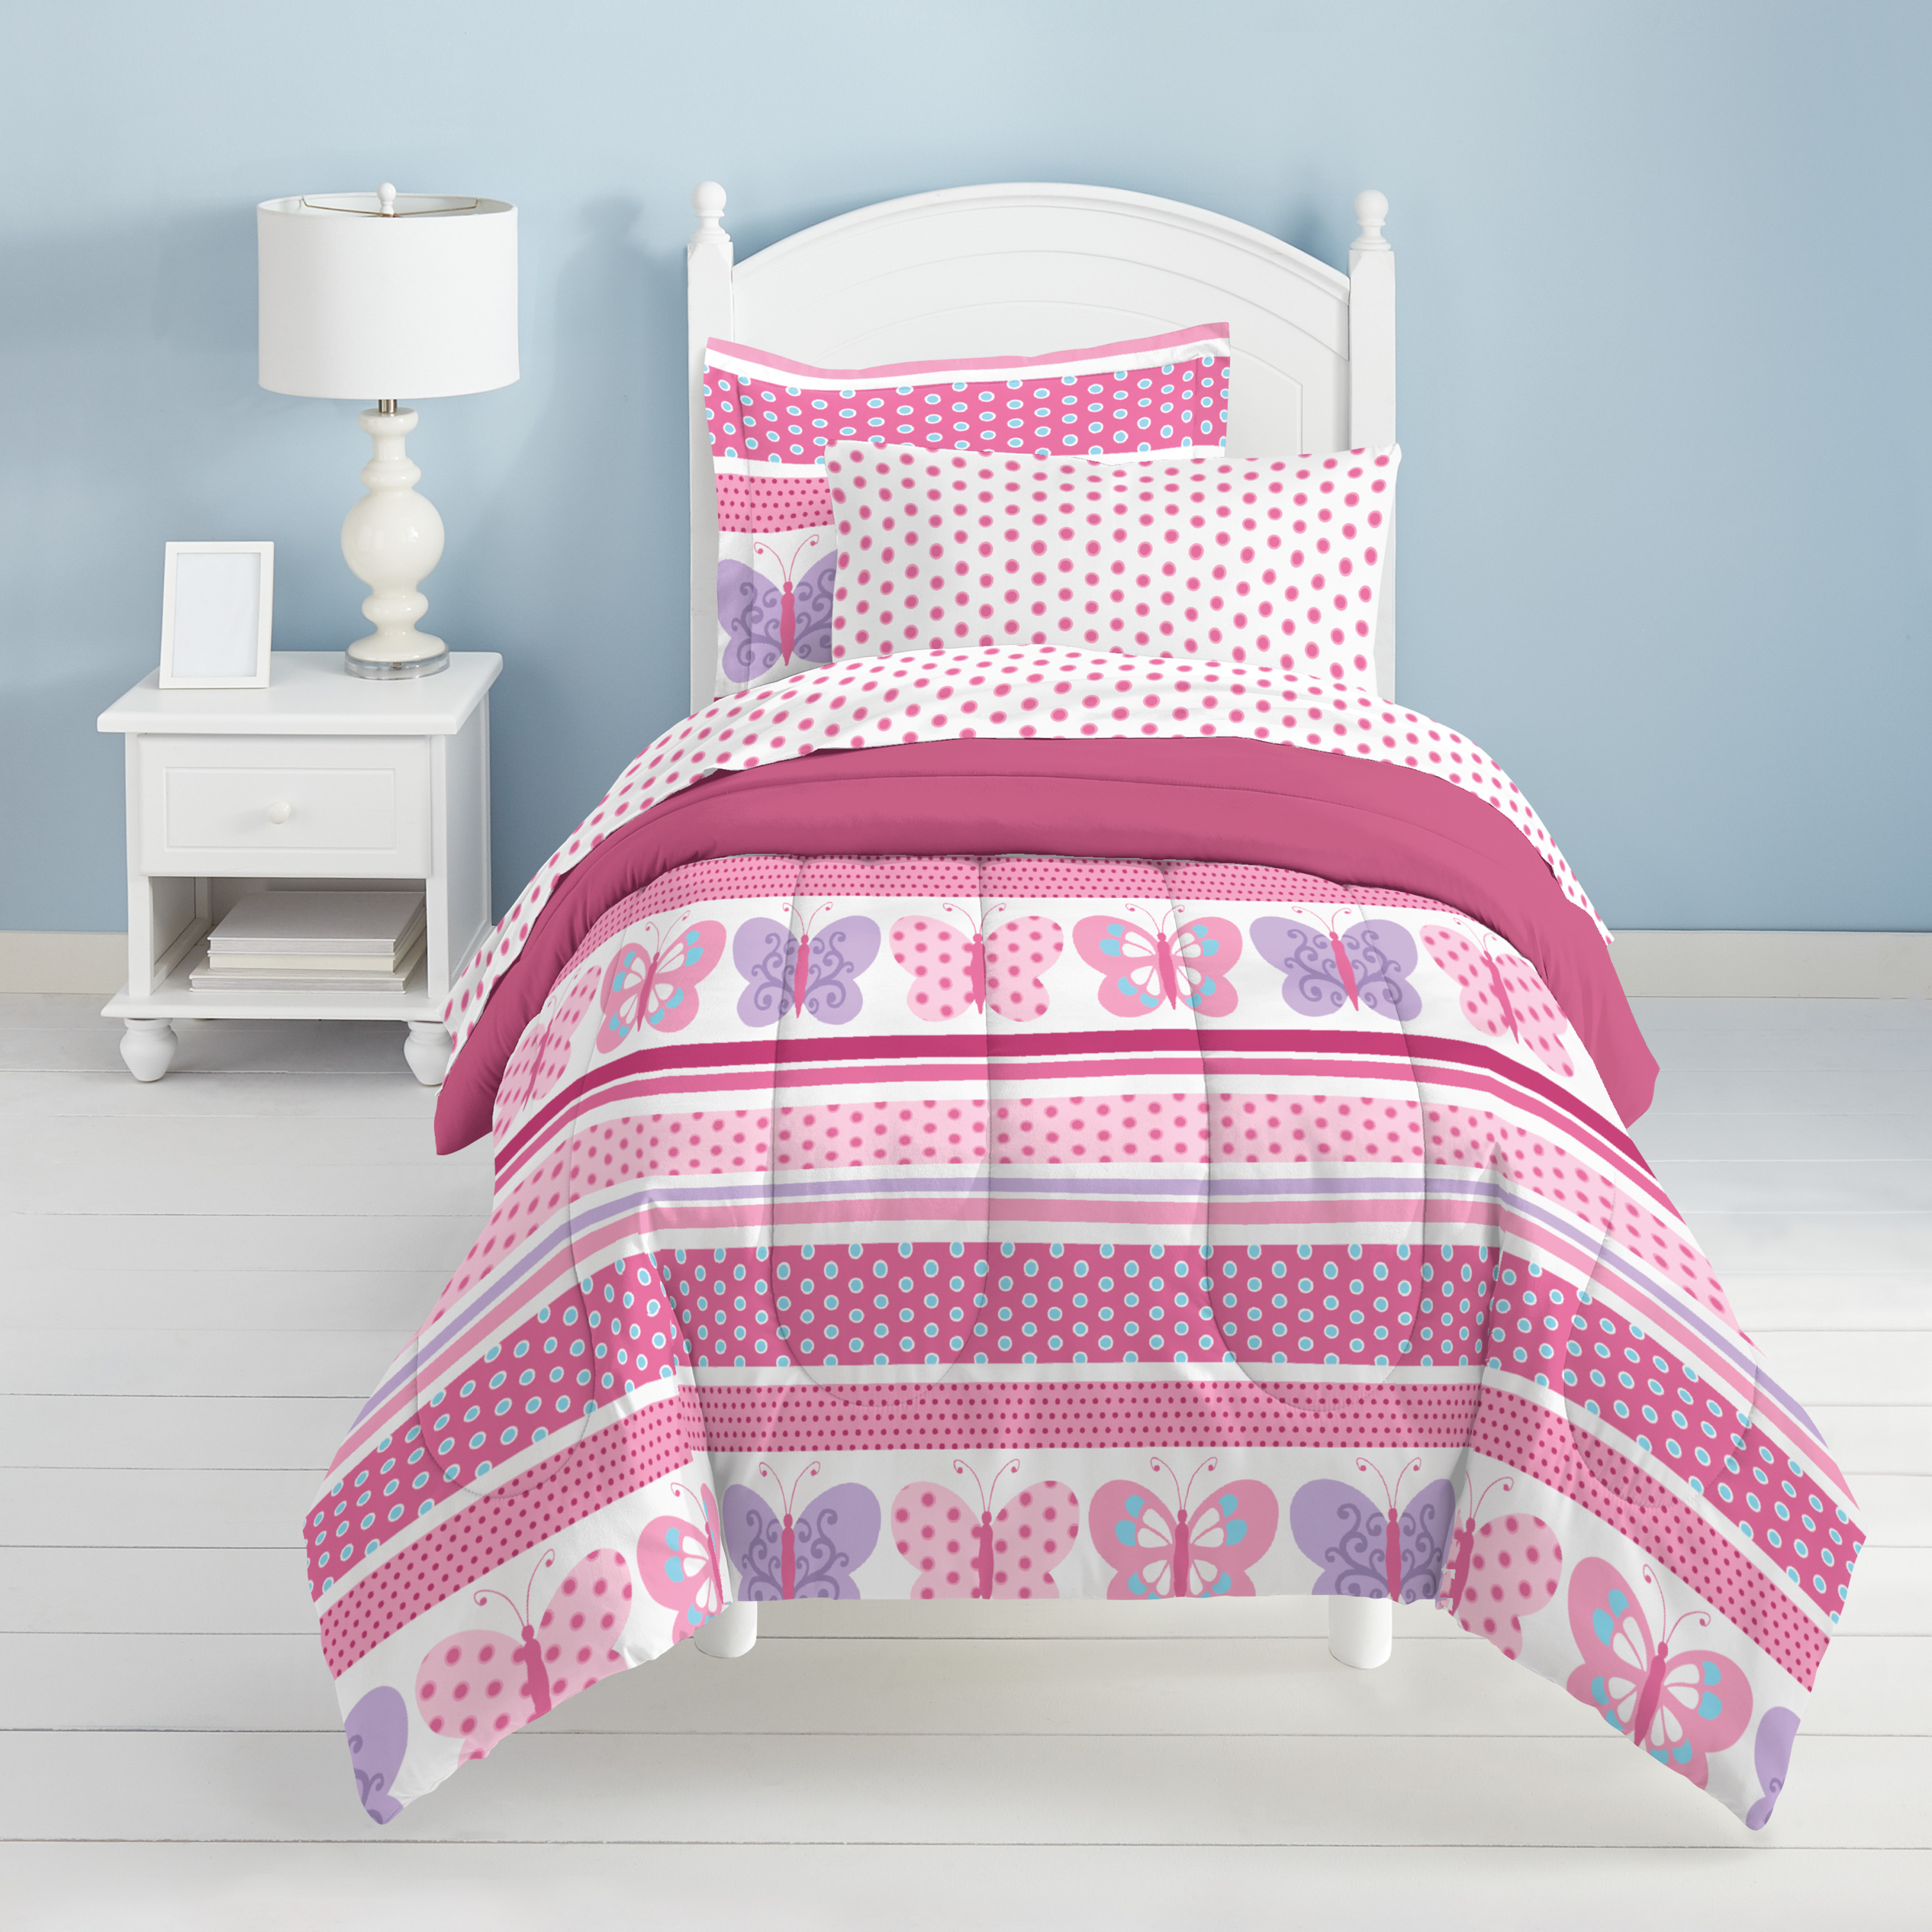 Dream Factory Butterfly Dots Twin 5 Piece Comforter Set, Polyester, Microfiber, Pink, Purple, White, Multi, Child, Female - image 3 of 6